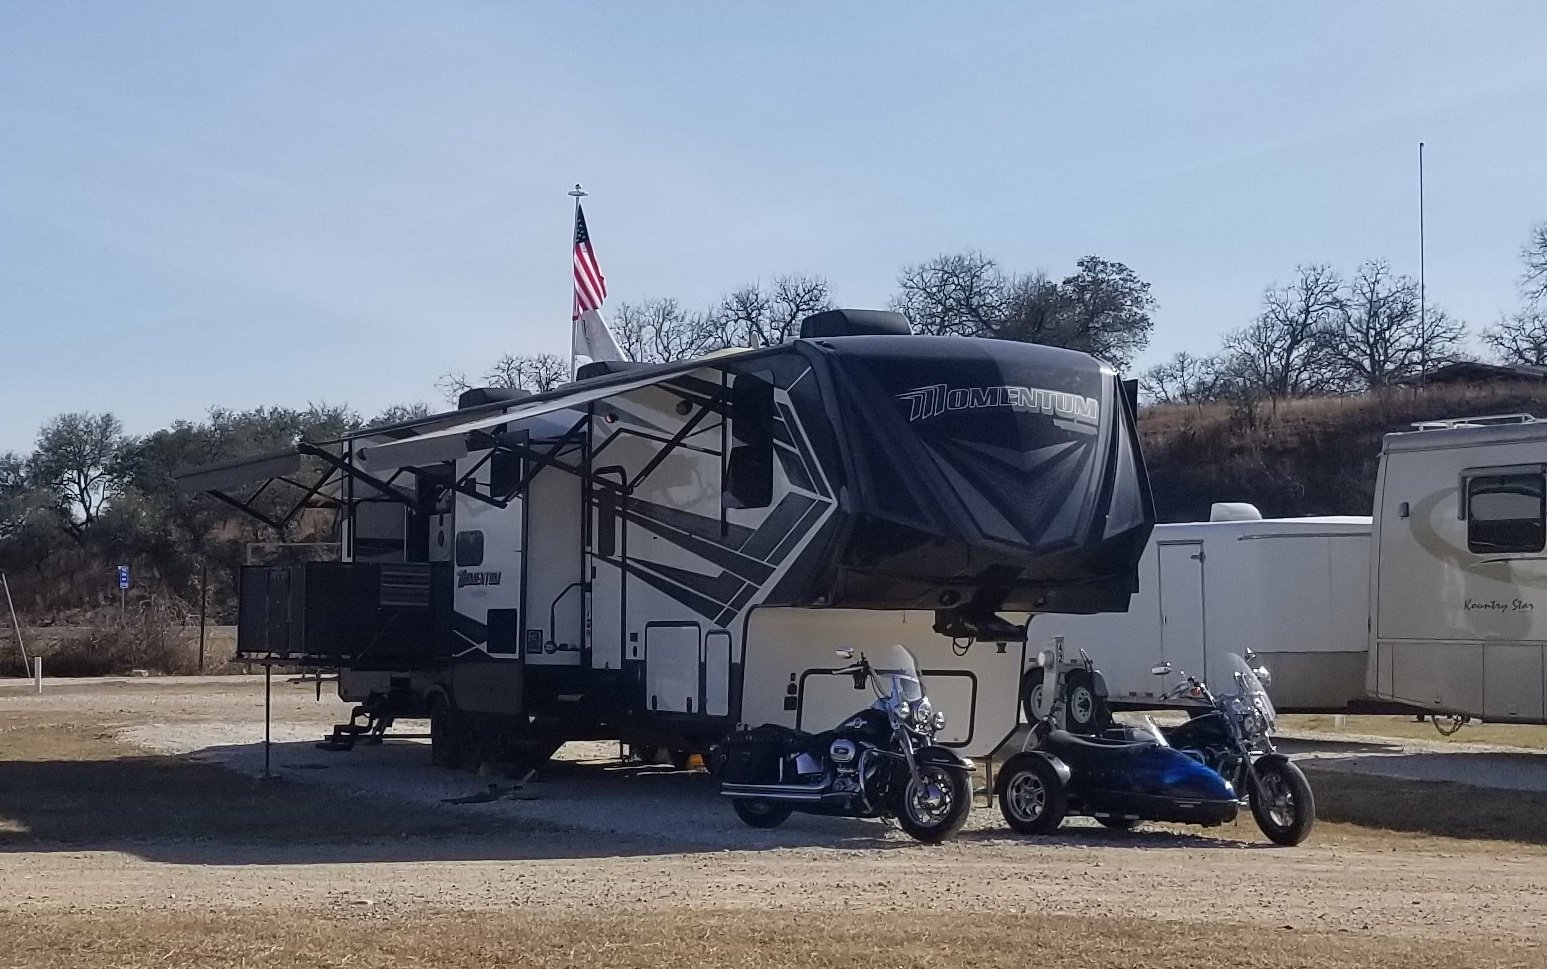 An RV with two motorcycles in an RV park